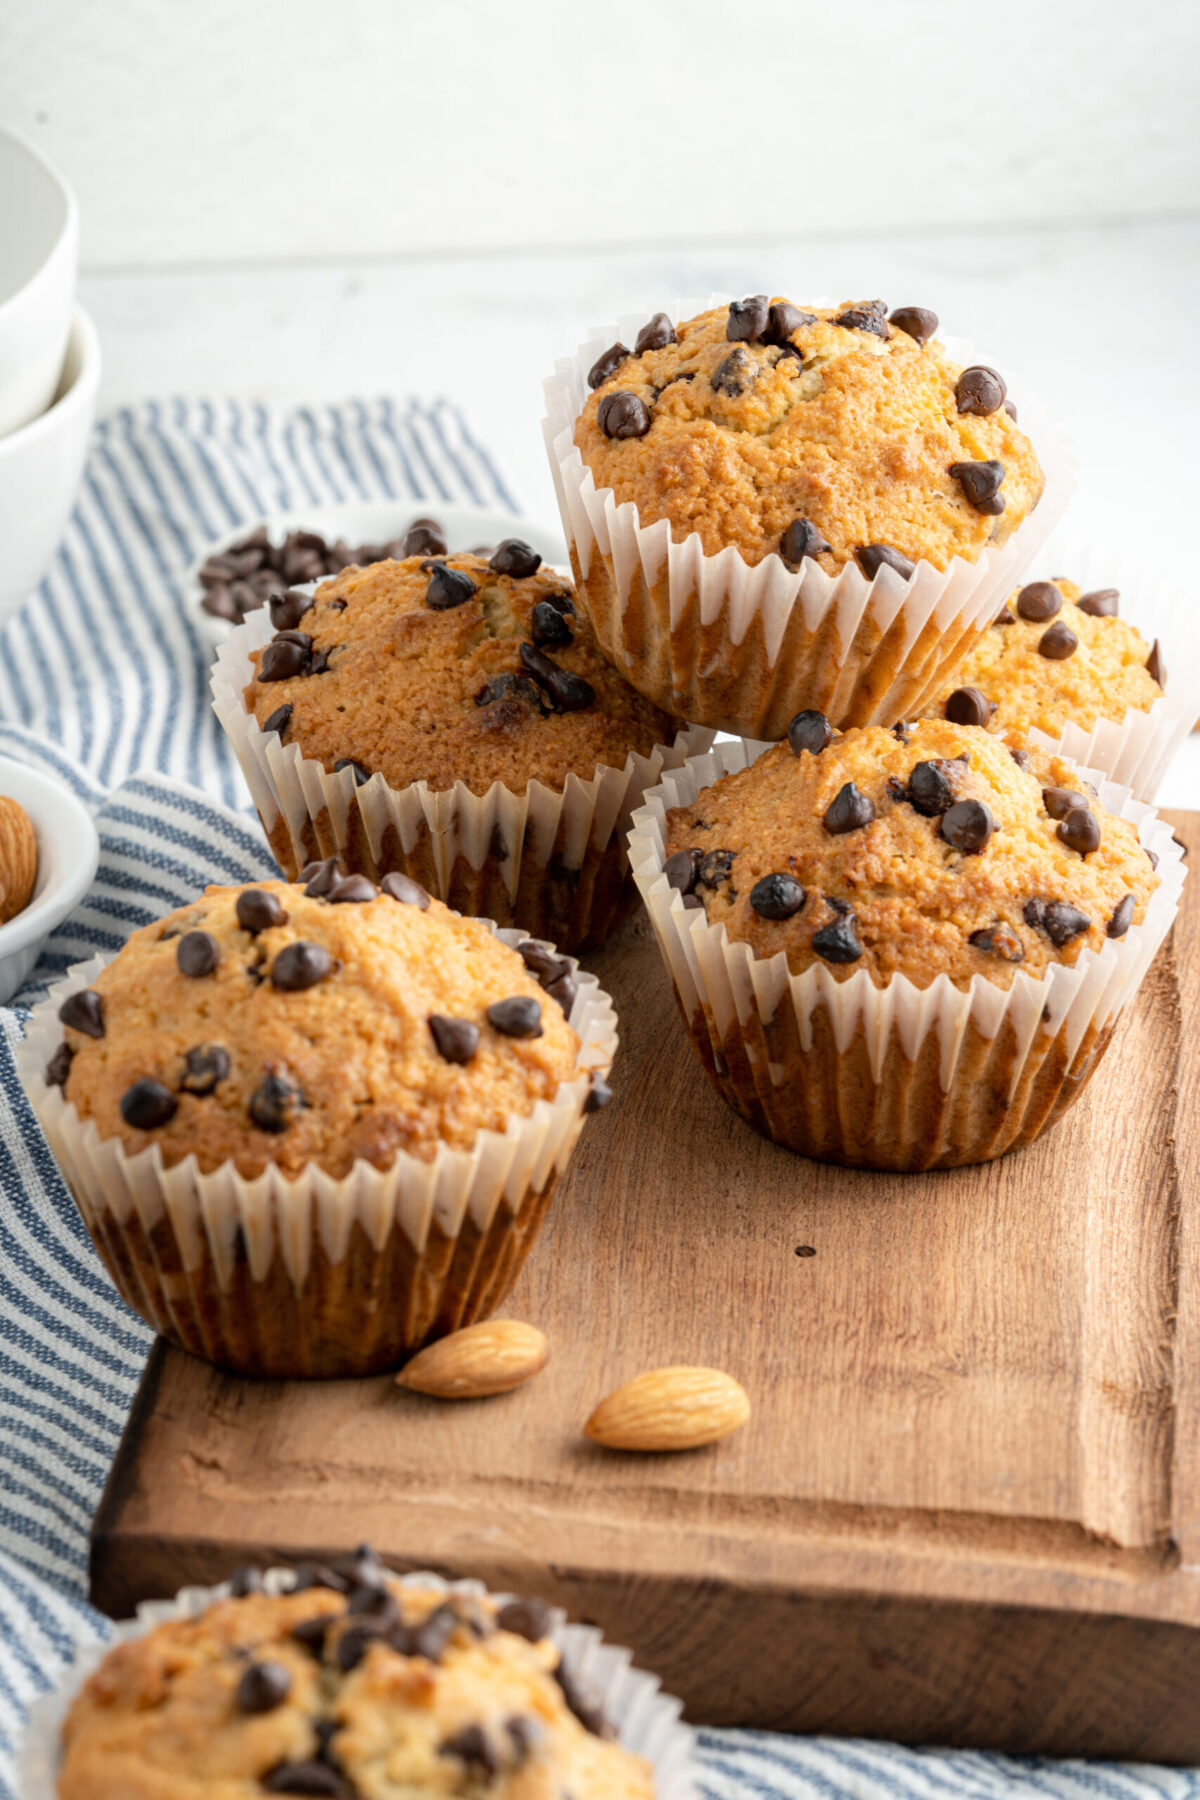 Super easy to make, sugar free and delicious, these Almond Flour Chocolate Chip Muffins all be your new favorite breakfast or snack!